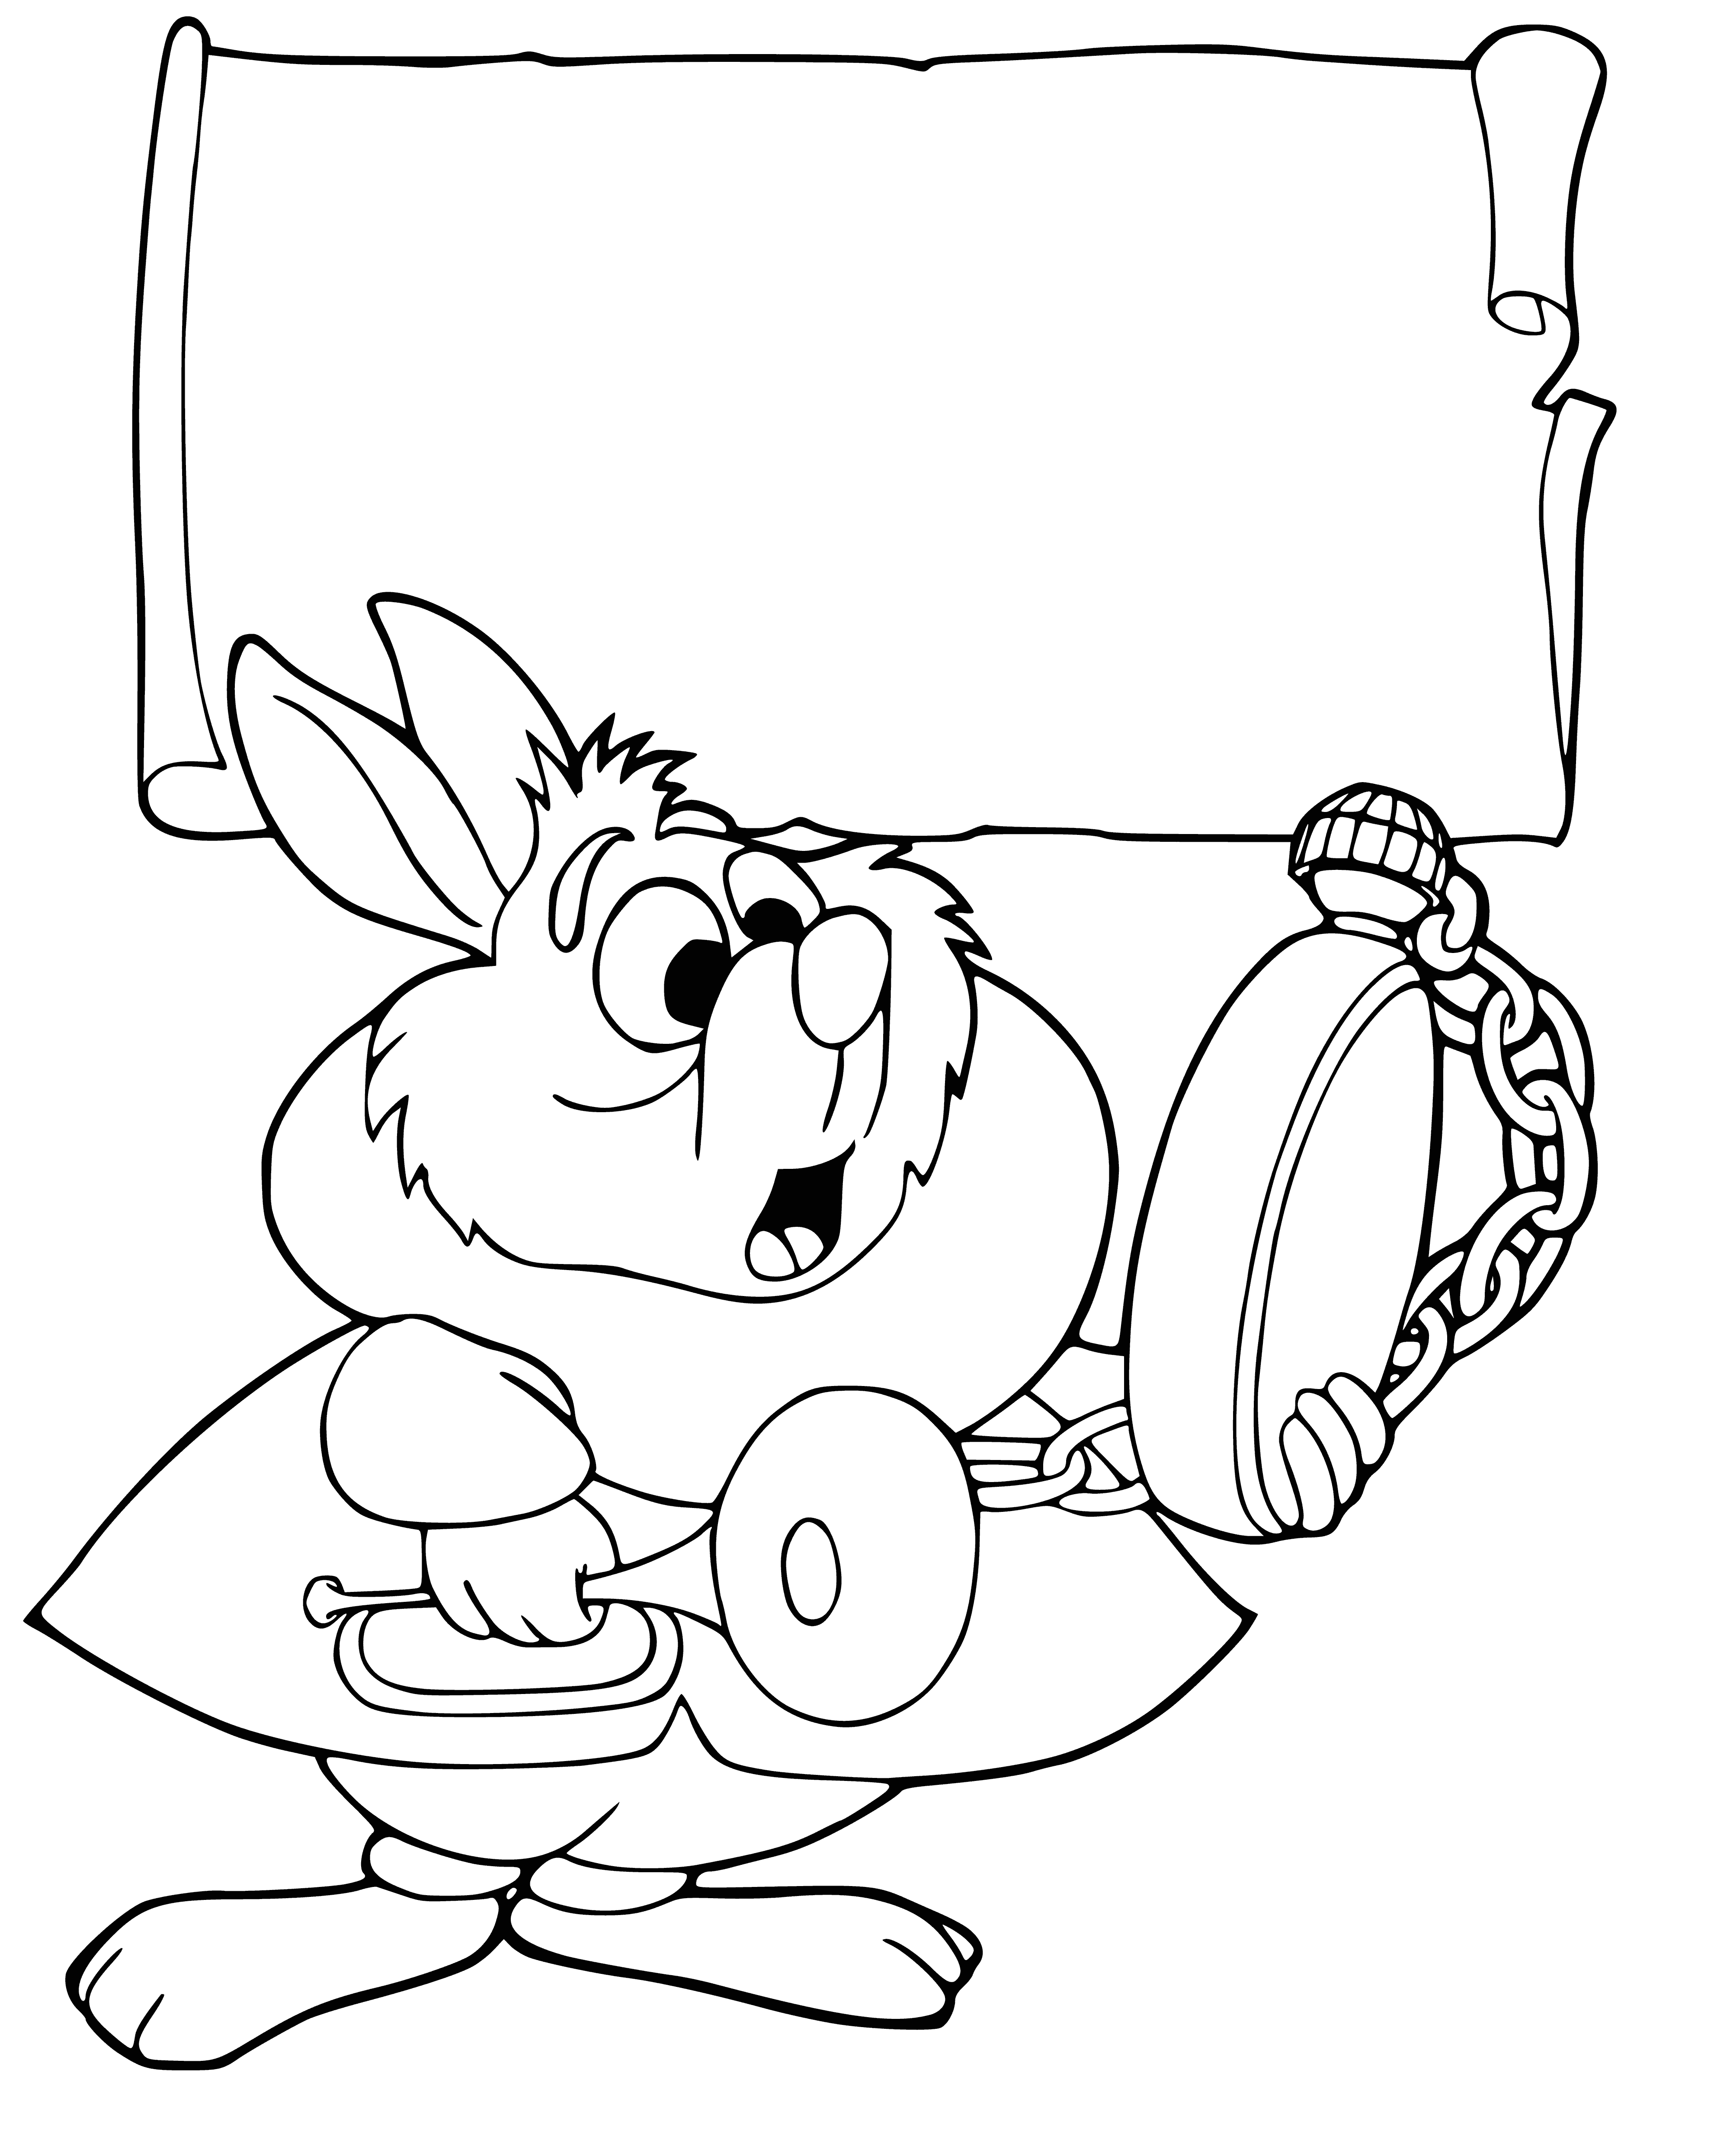 coloring page: A white rabbit with a pocket watch is curiously looking through a door in a cozy room. #coloring